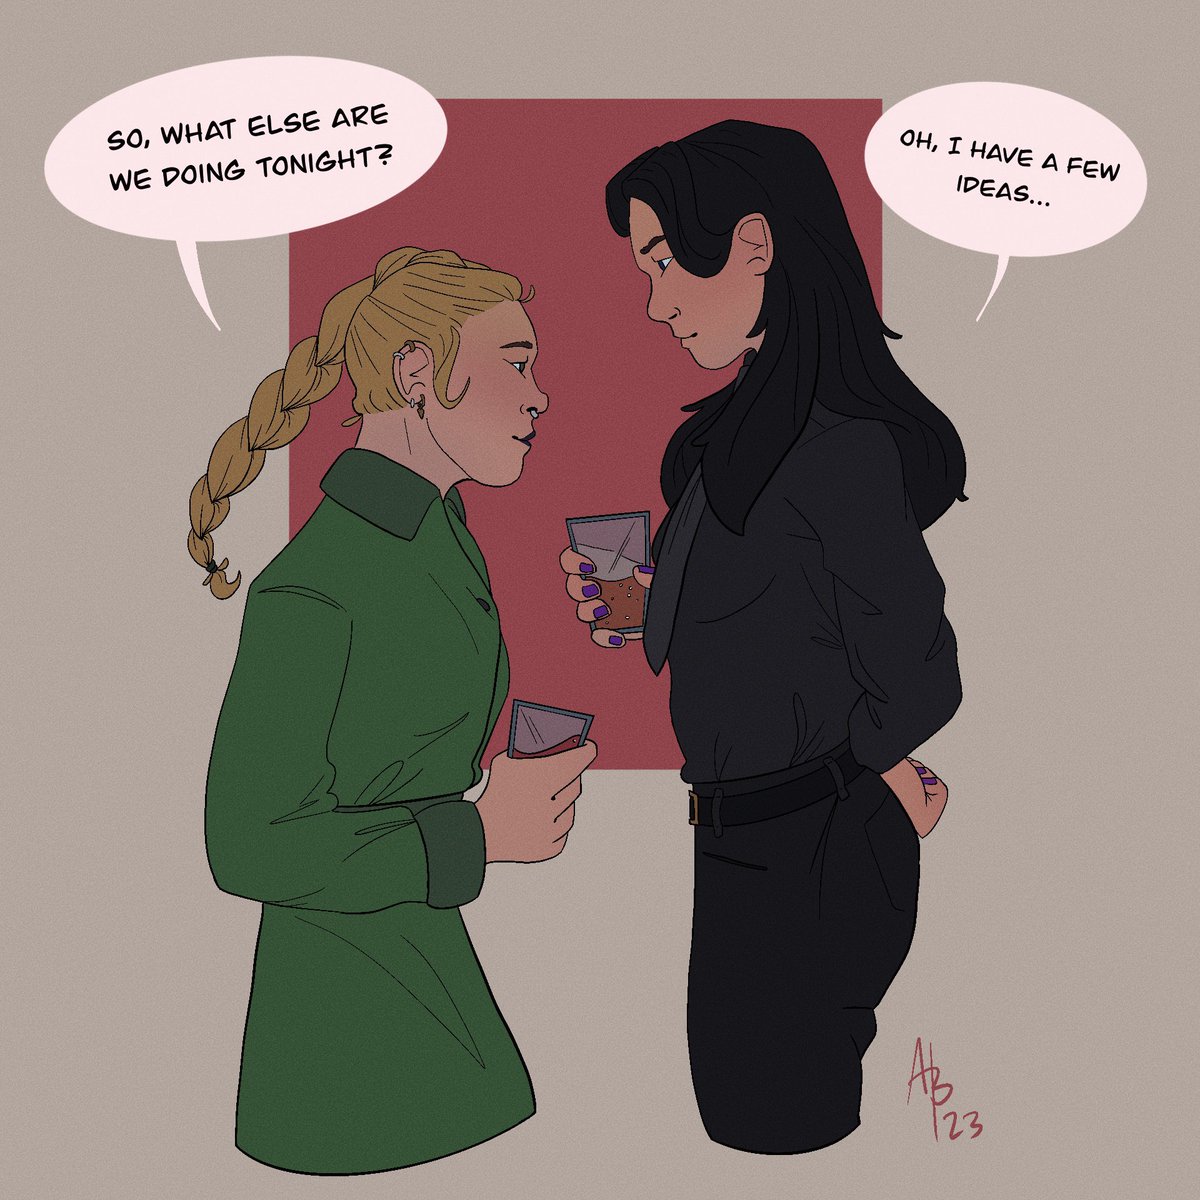 When Kate and Yelena finally go out for drinks, what then?
-
#bishova #KateBishop #YelenaBelova